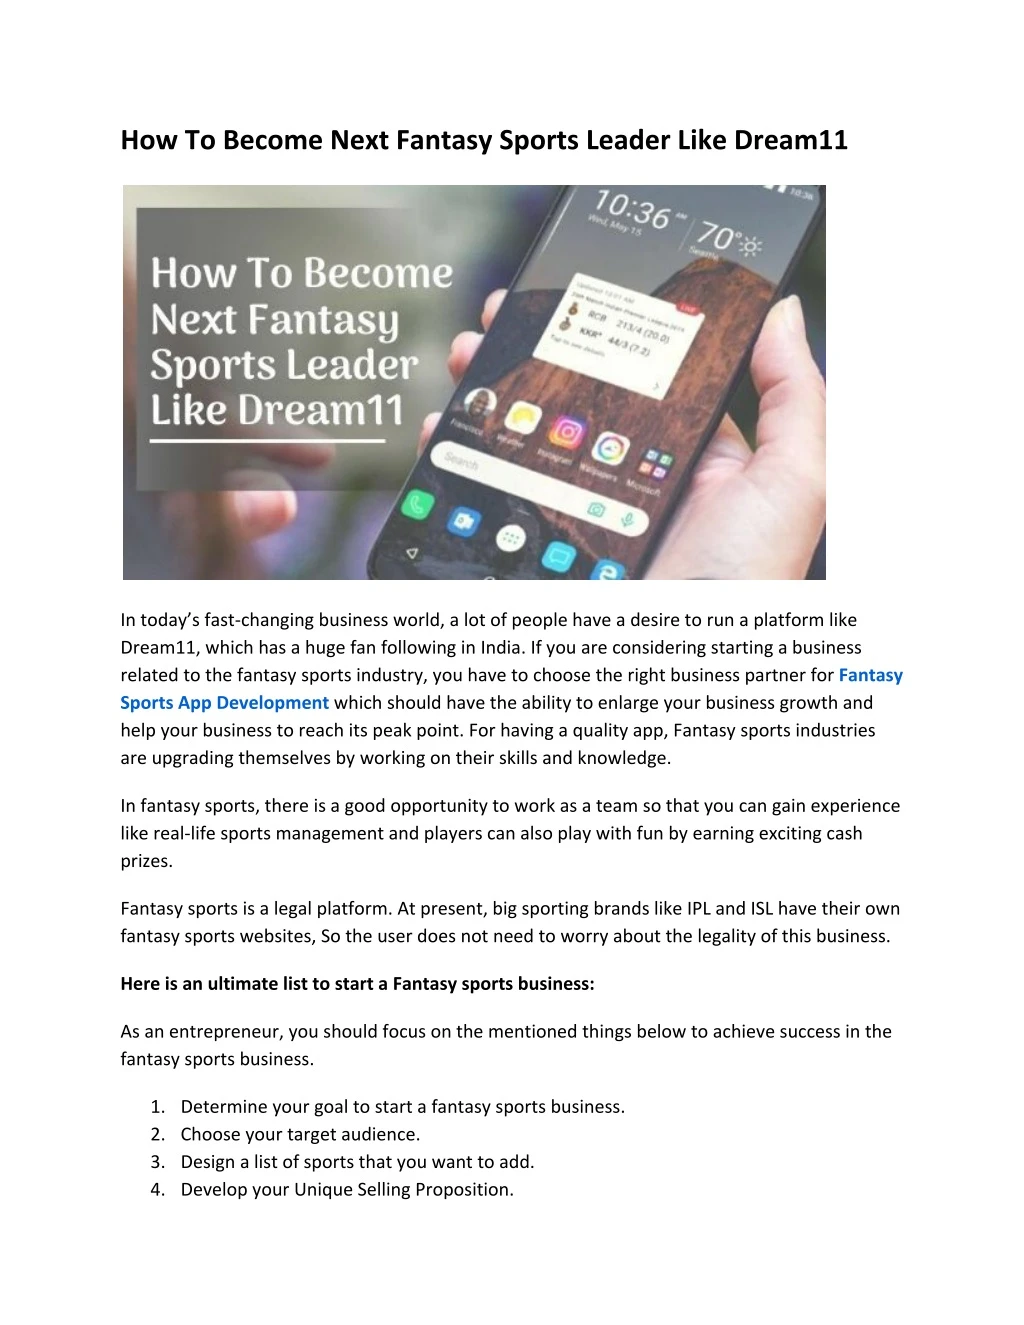 how to become next fantasy sports leader like